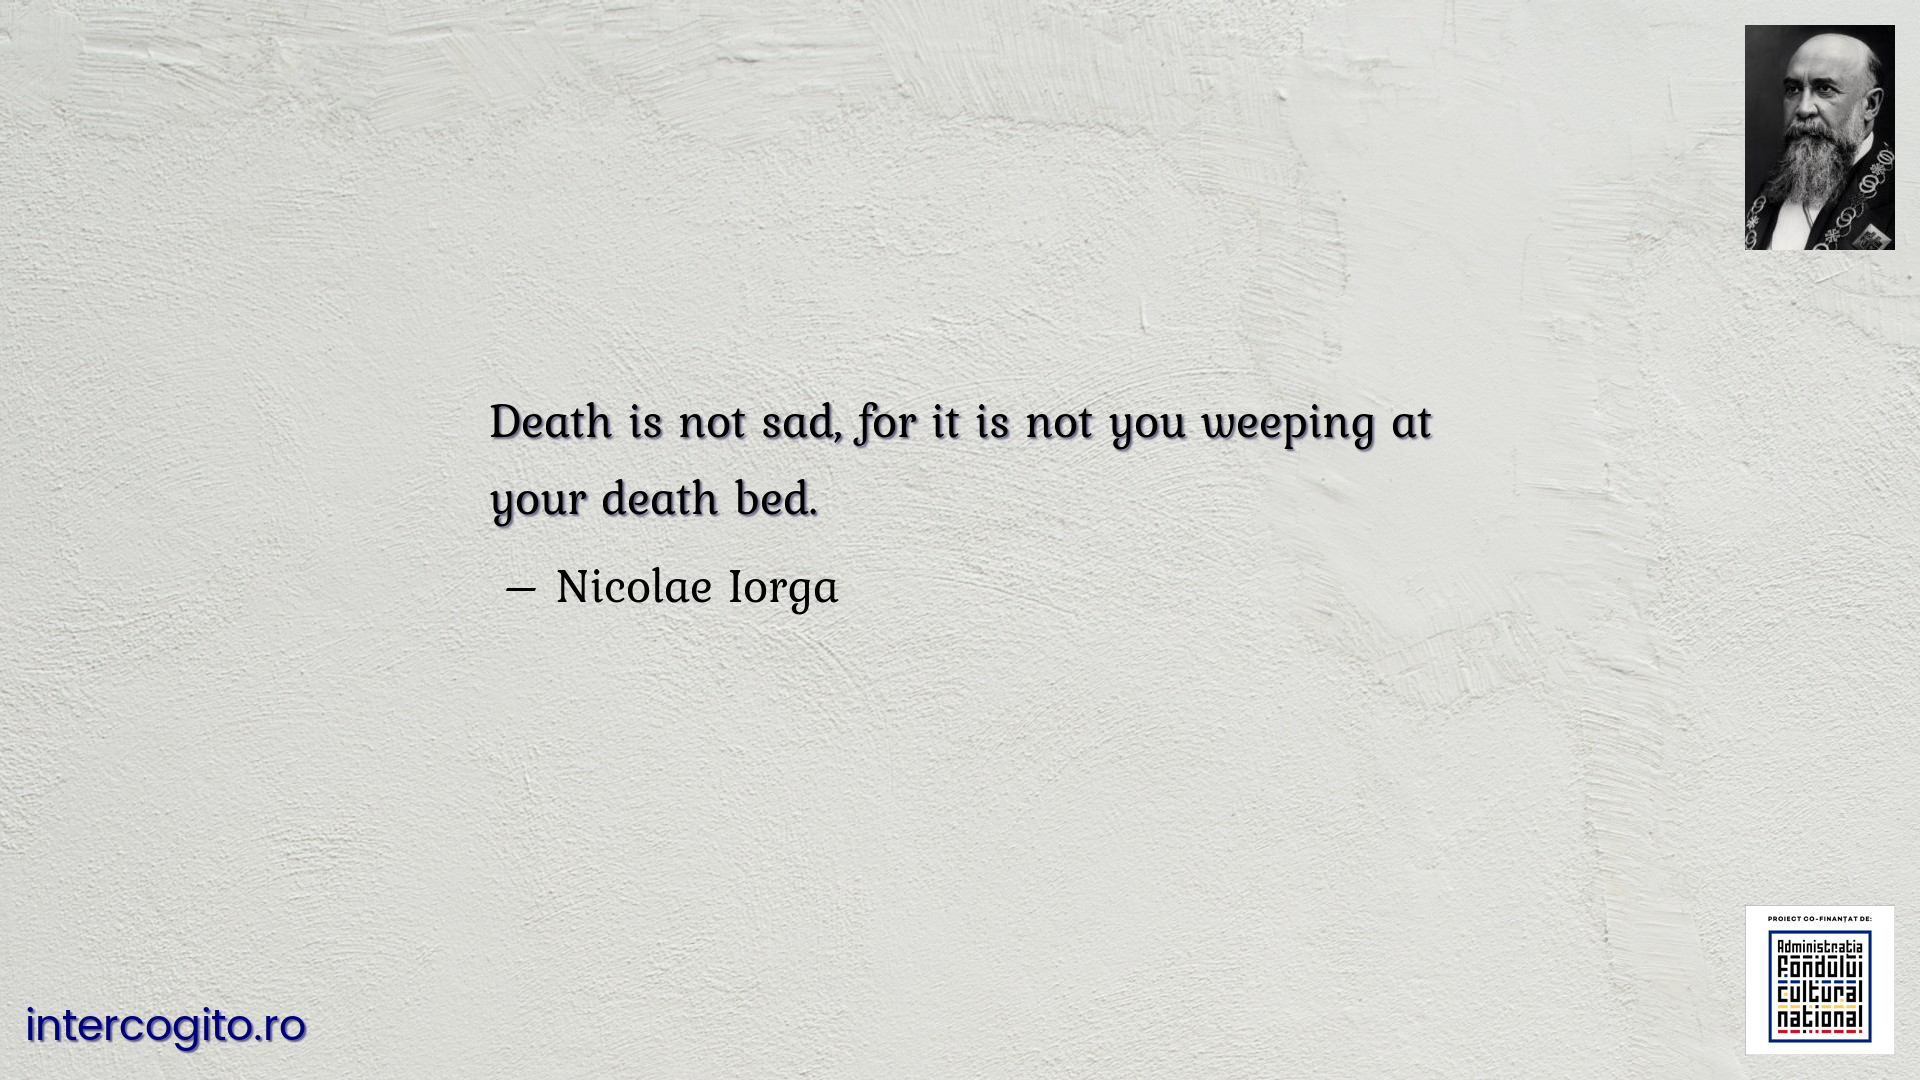 Death is not sad, for it is not you weeping at your death bed.